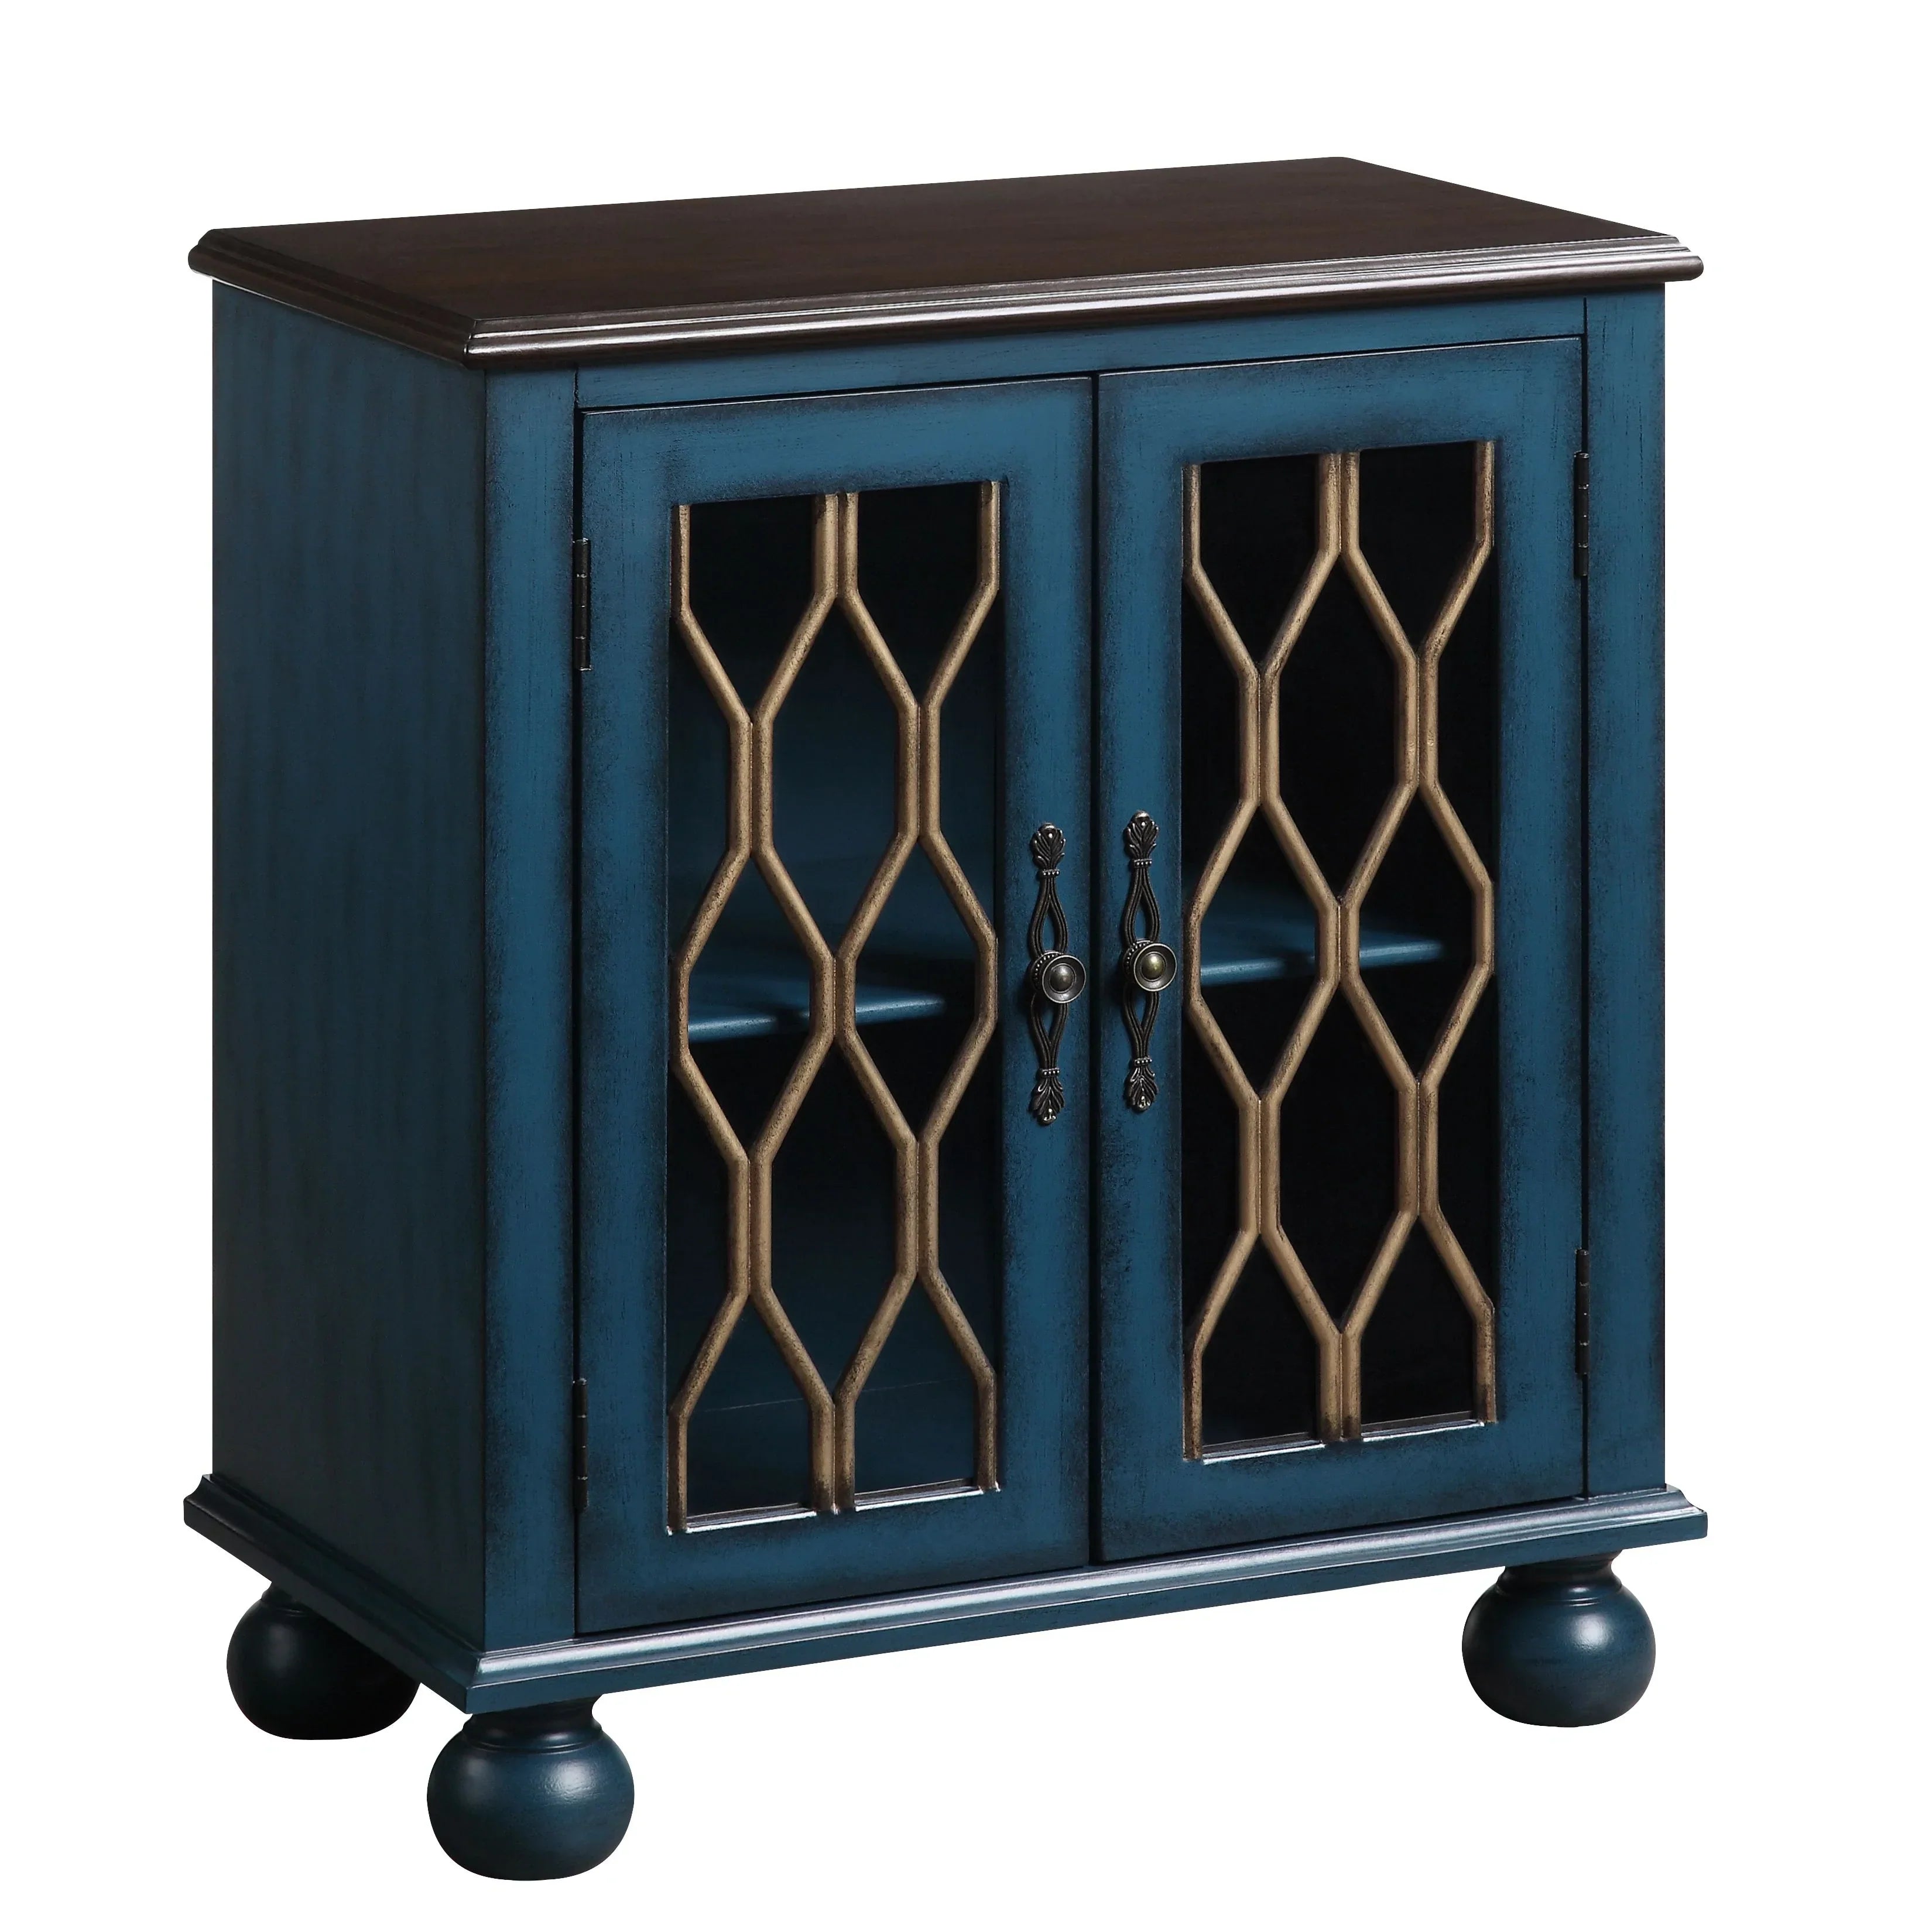 Lassie Antique Blue Finish Accent Table Model AC00195 By ACME Furniture